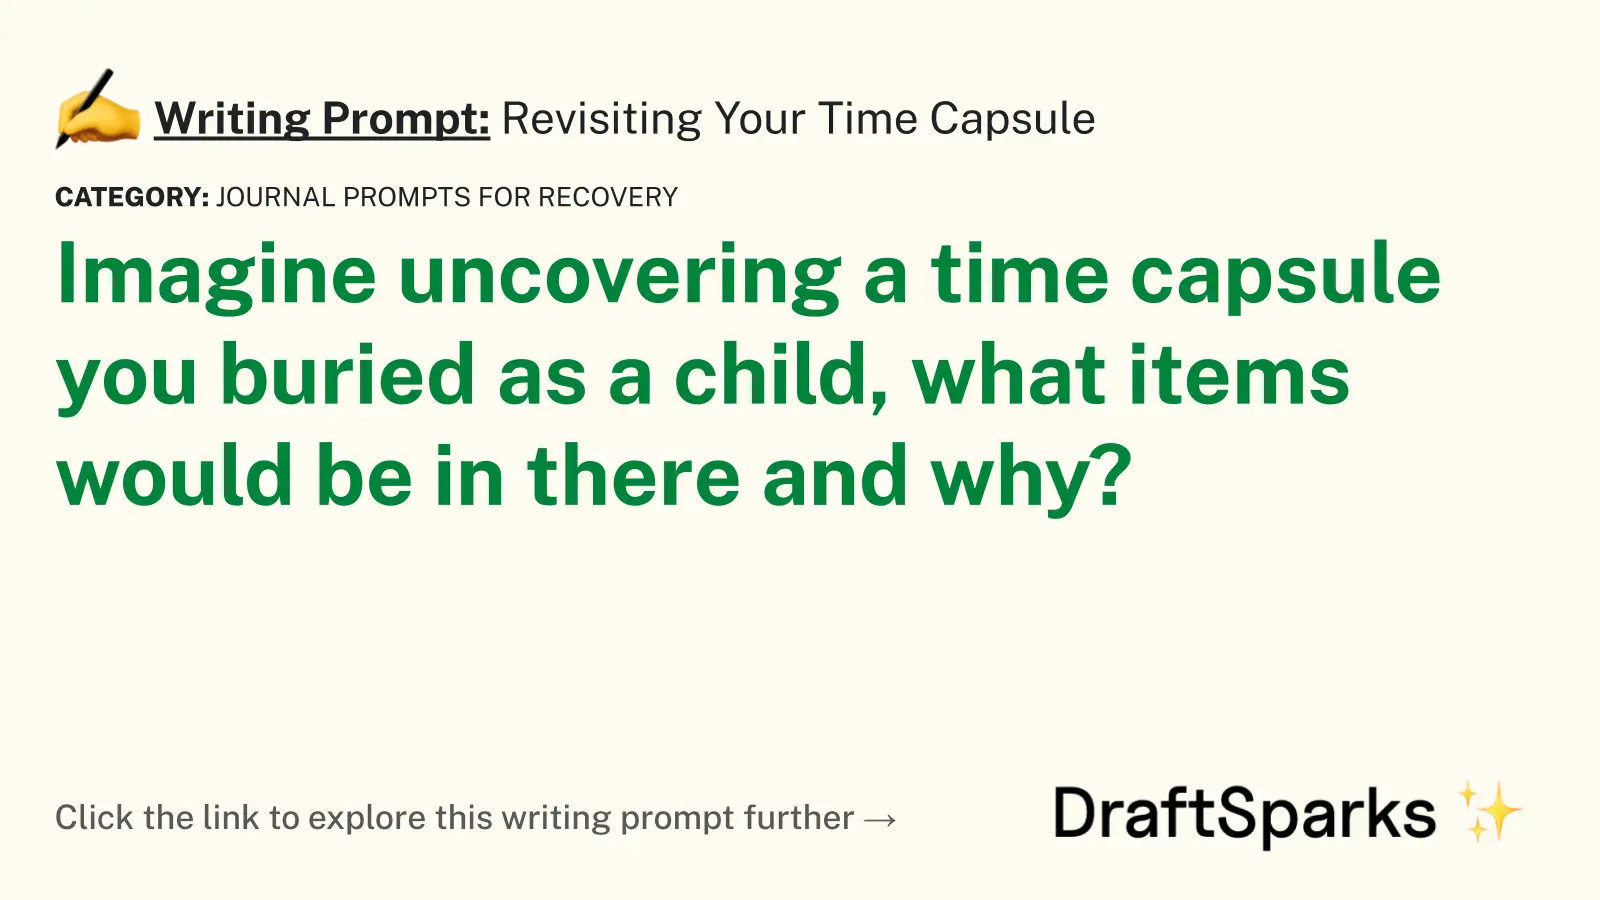 Revisiting Your Time Capsule